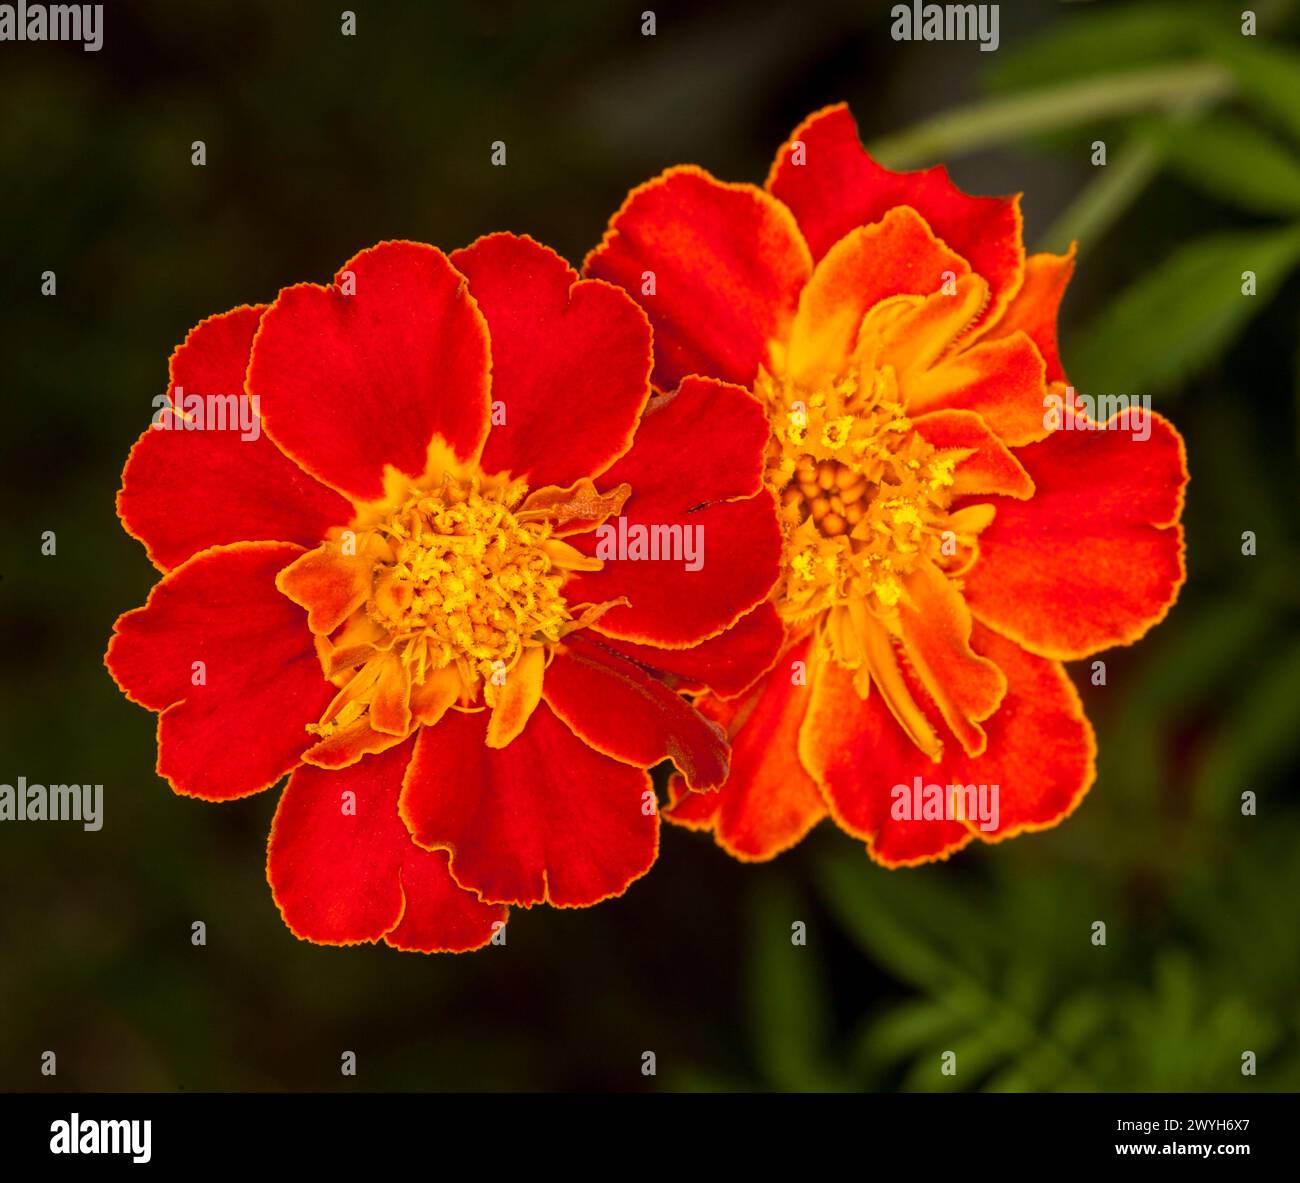 Vivid red / orange flowers of French Marigolds, Tagetes patula, an annual garden plant, on a dark background in a garden Stock Photo